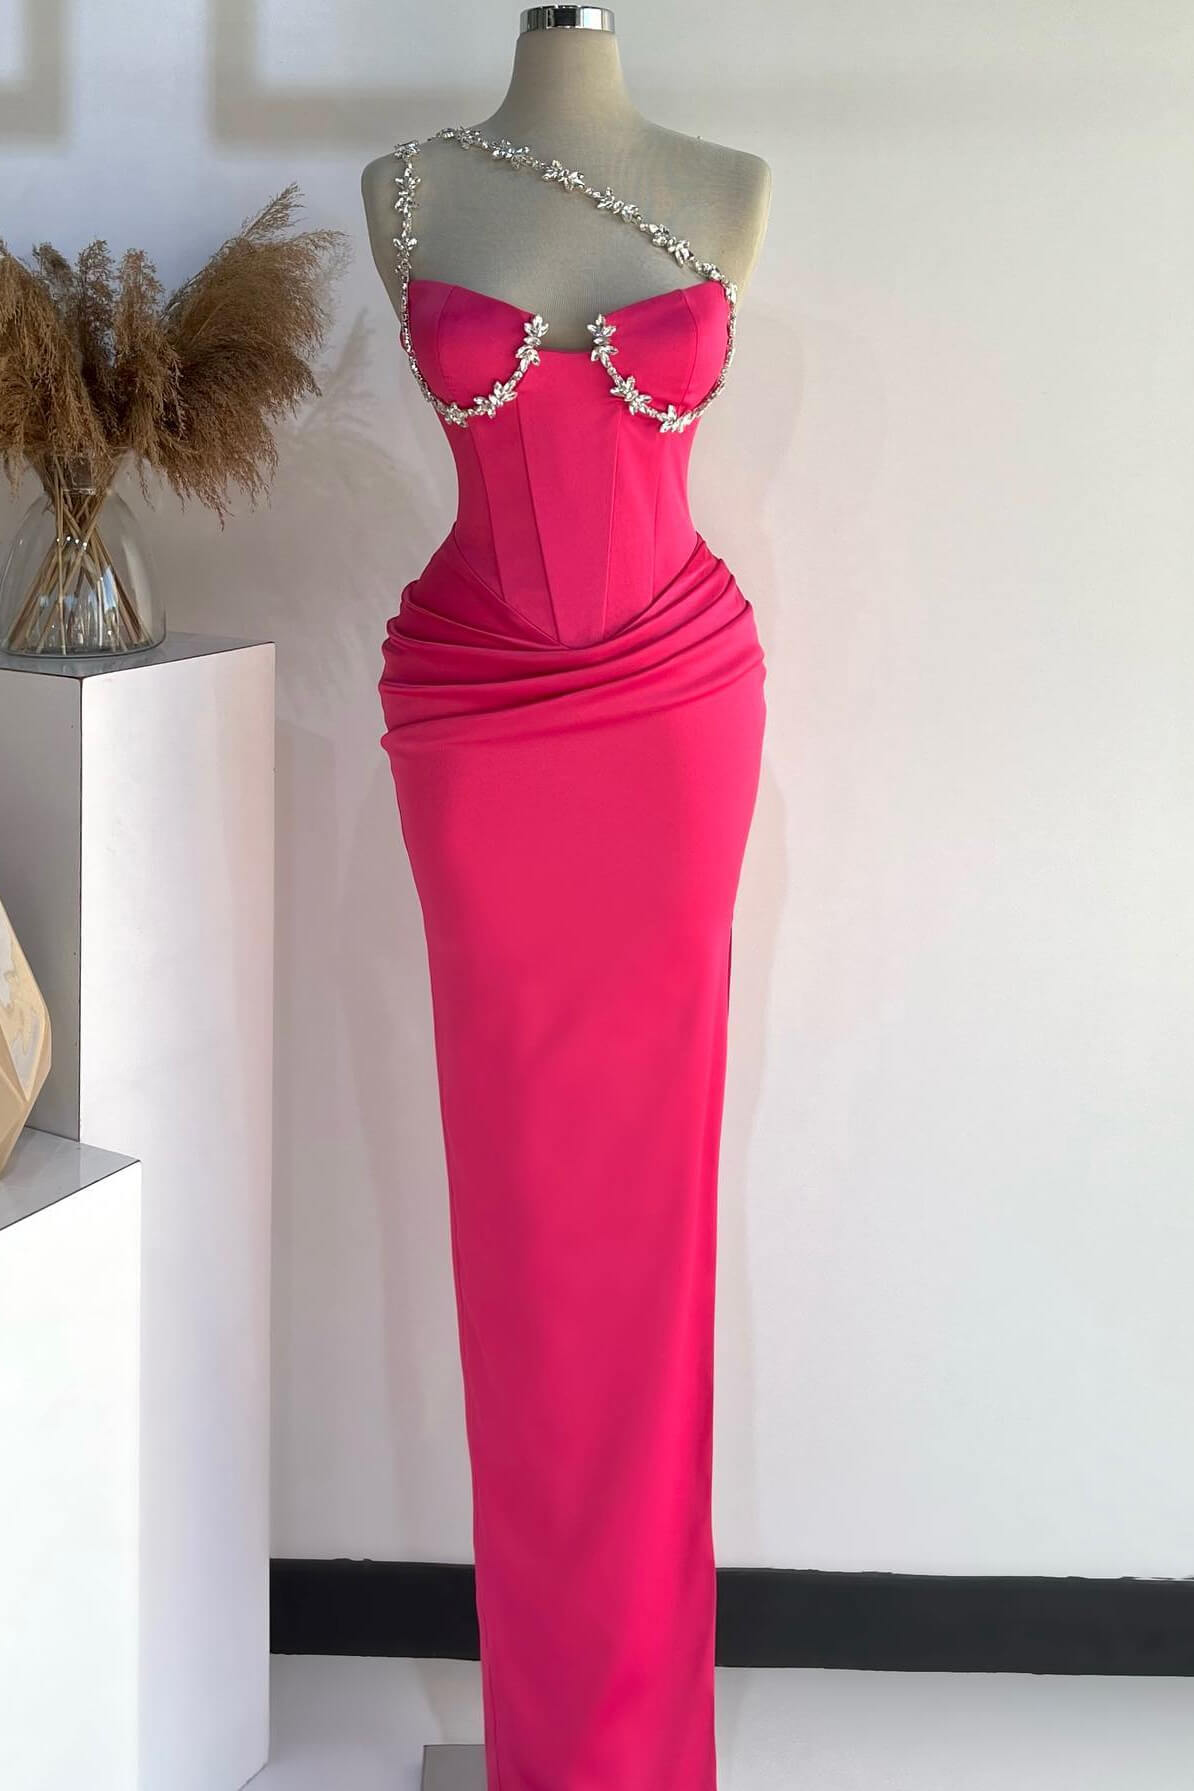 Chic Fuchsia One Shoulder Sleeveless Mermaid Evening Gown With Crystals Long - lulusllly